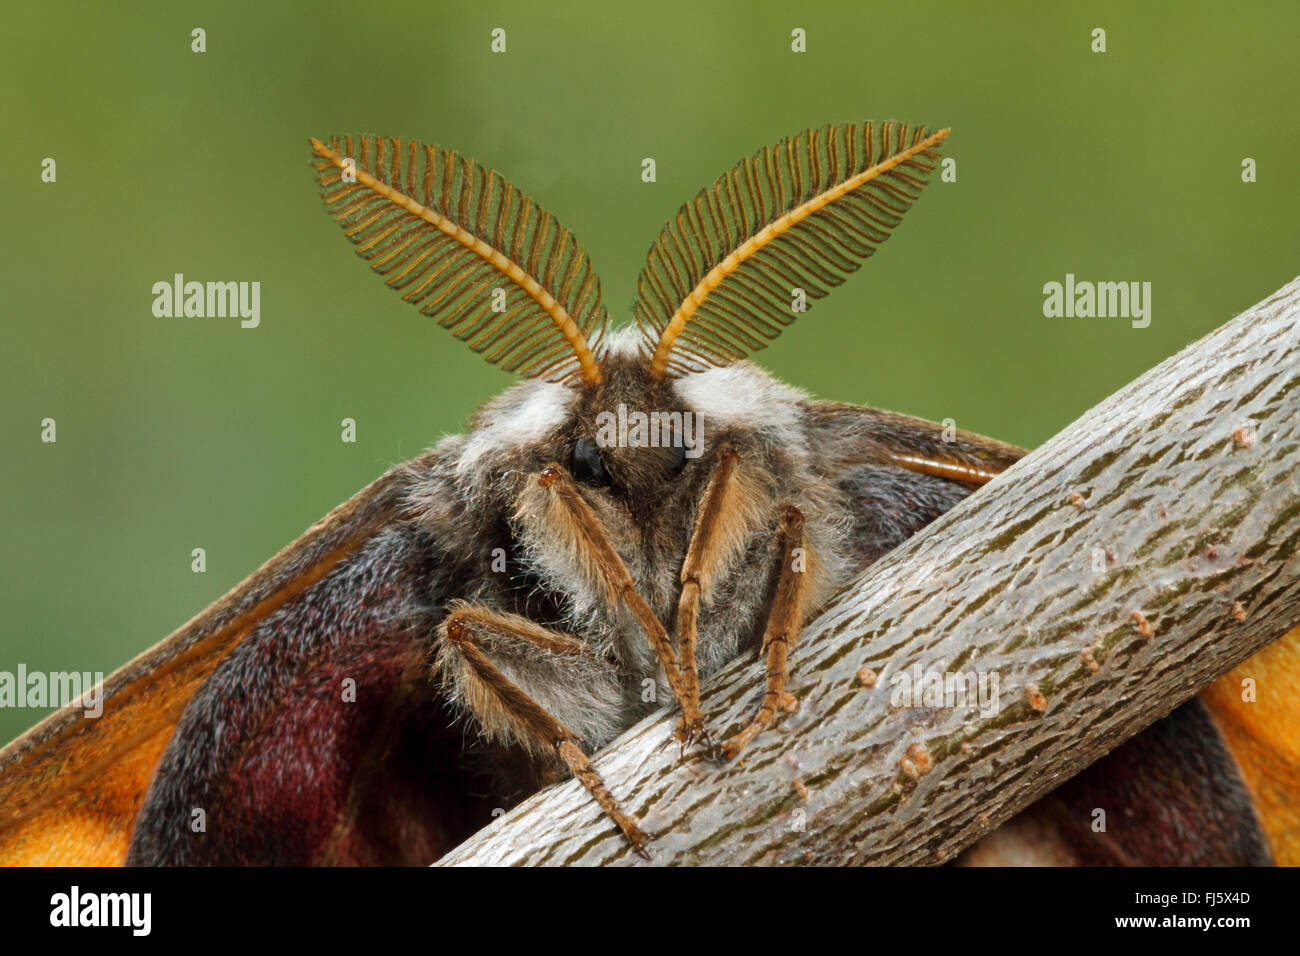 Emperor moth, Small Emperor Moth (Saturnia pavonia, Eudia pavonia), male with large antennae, Germany Stock Photo